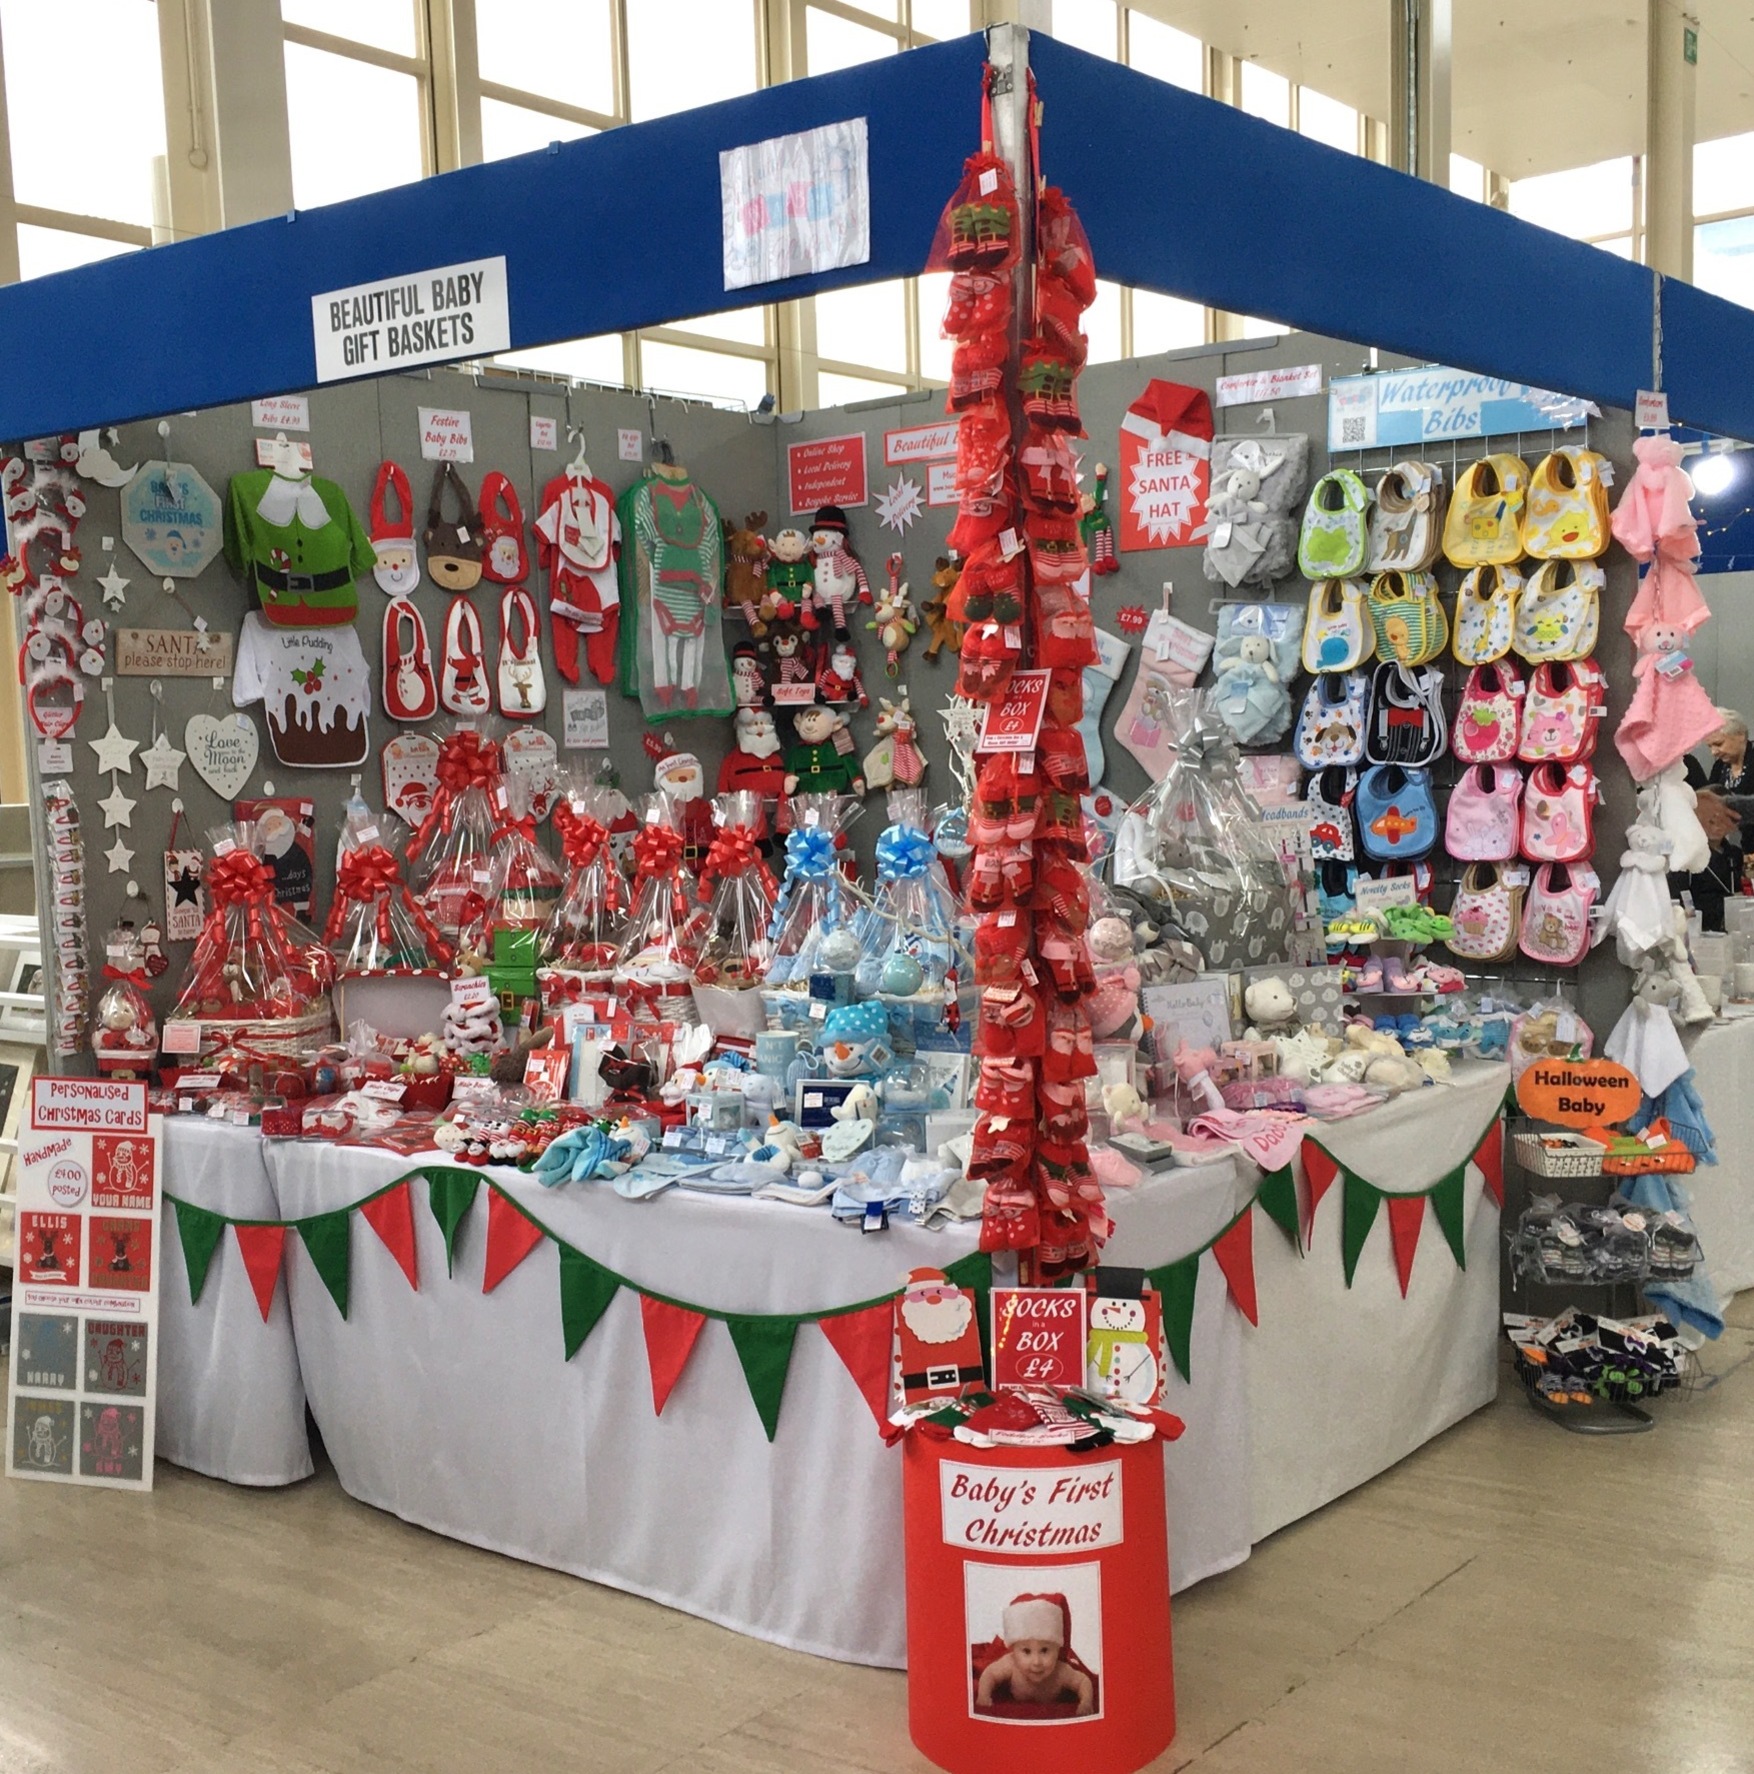 First Christmas Baby Gifts at Centre MK